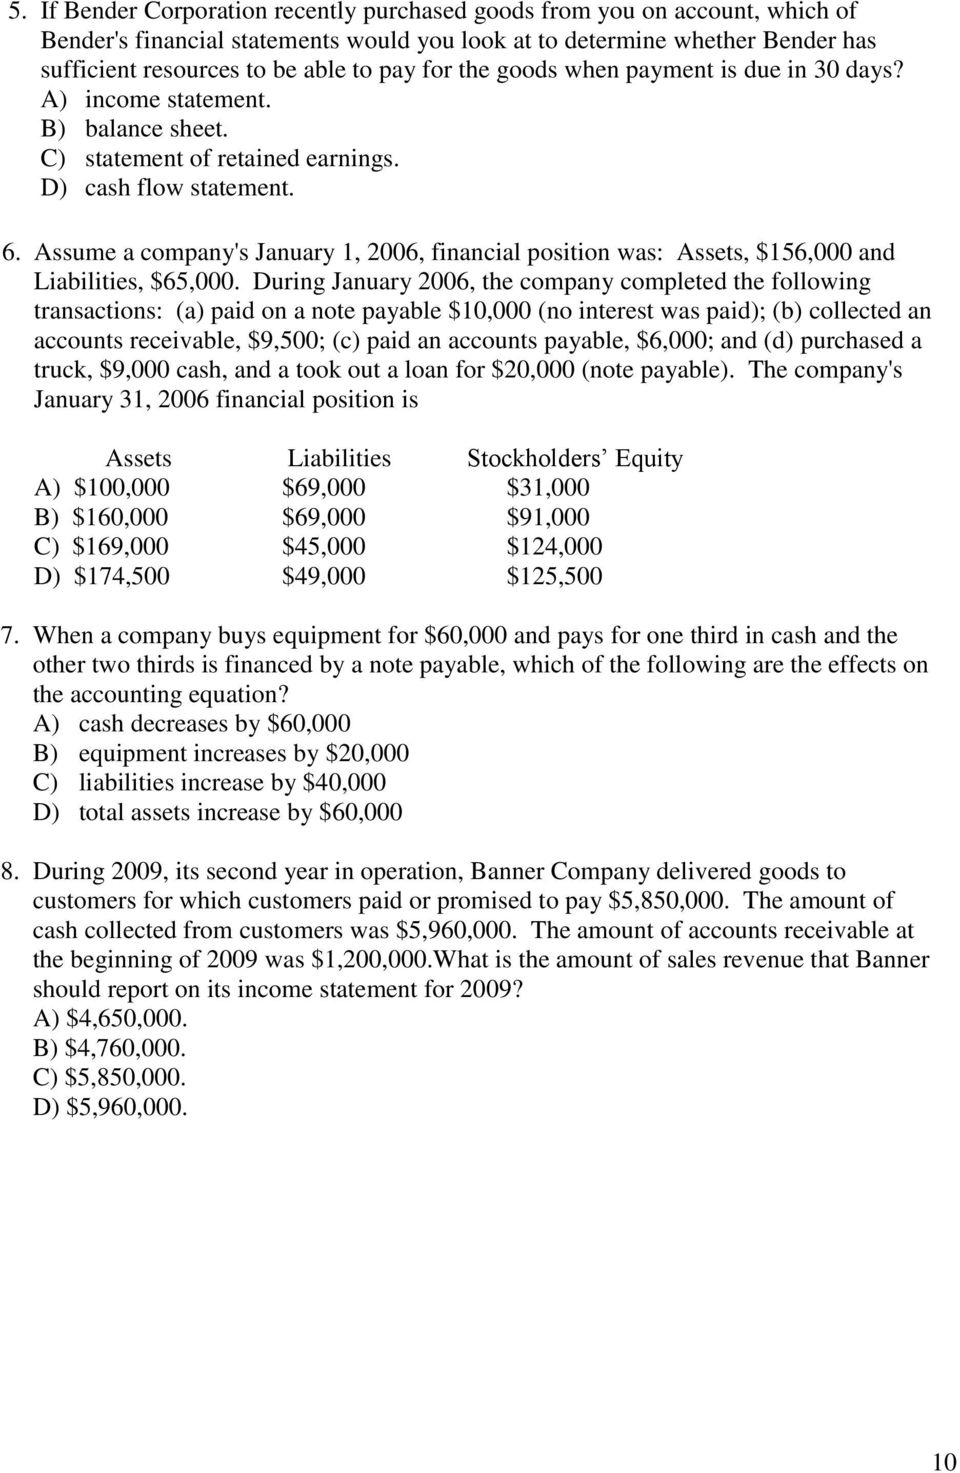 Assume a company's January 1, 2006, financial position was: Assets, $156,000 and Liabilities, $65,000.